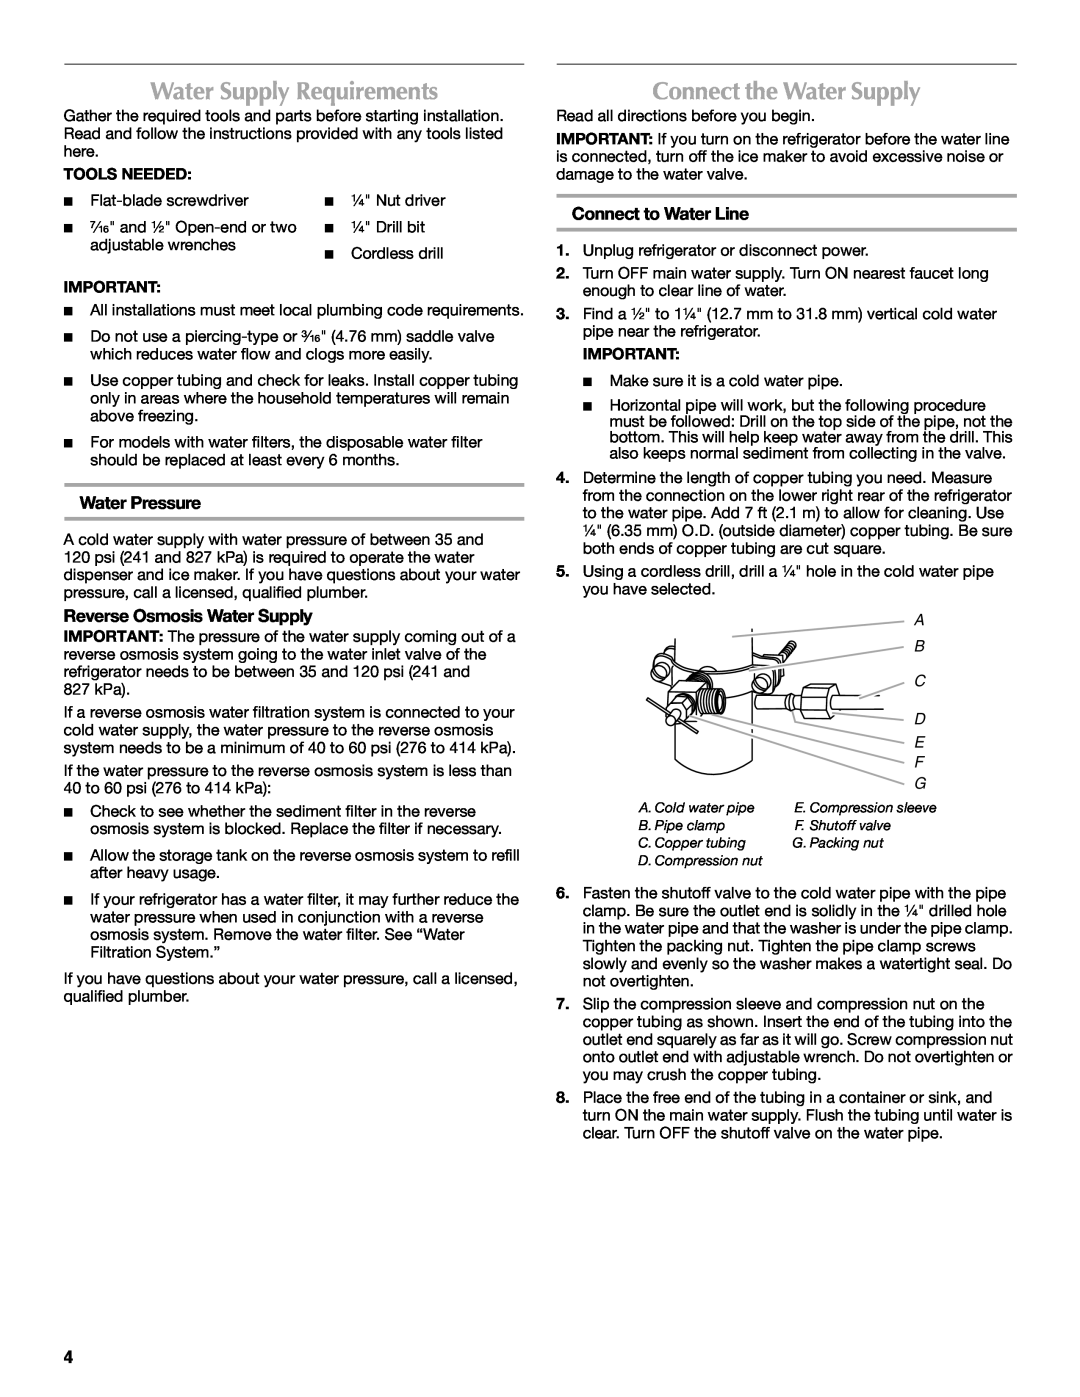 Maytag W10366206A Water Supply Requirements, Connect the Water Supply, Water Pressure, Reverse Osmosis Water Supply 